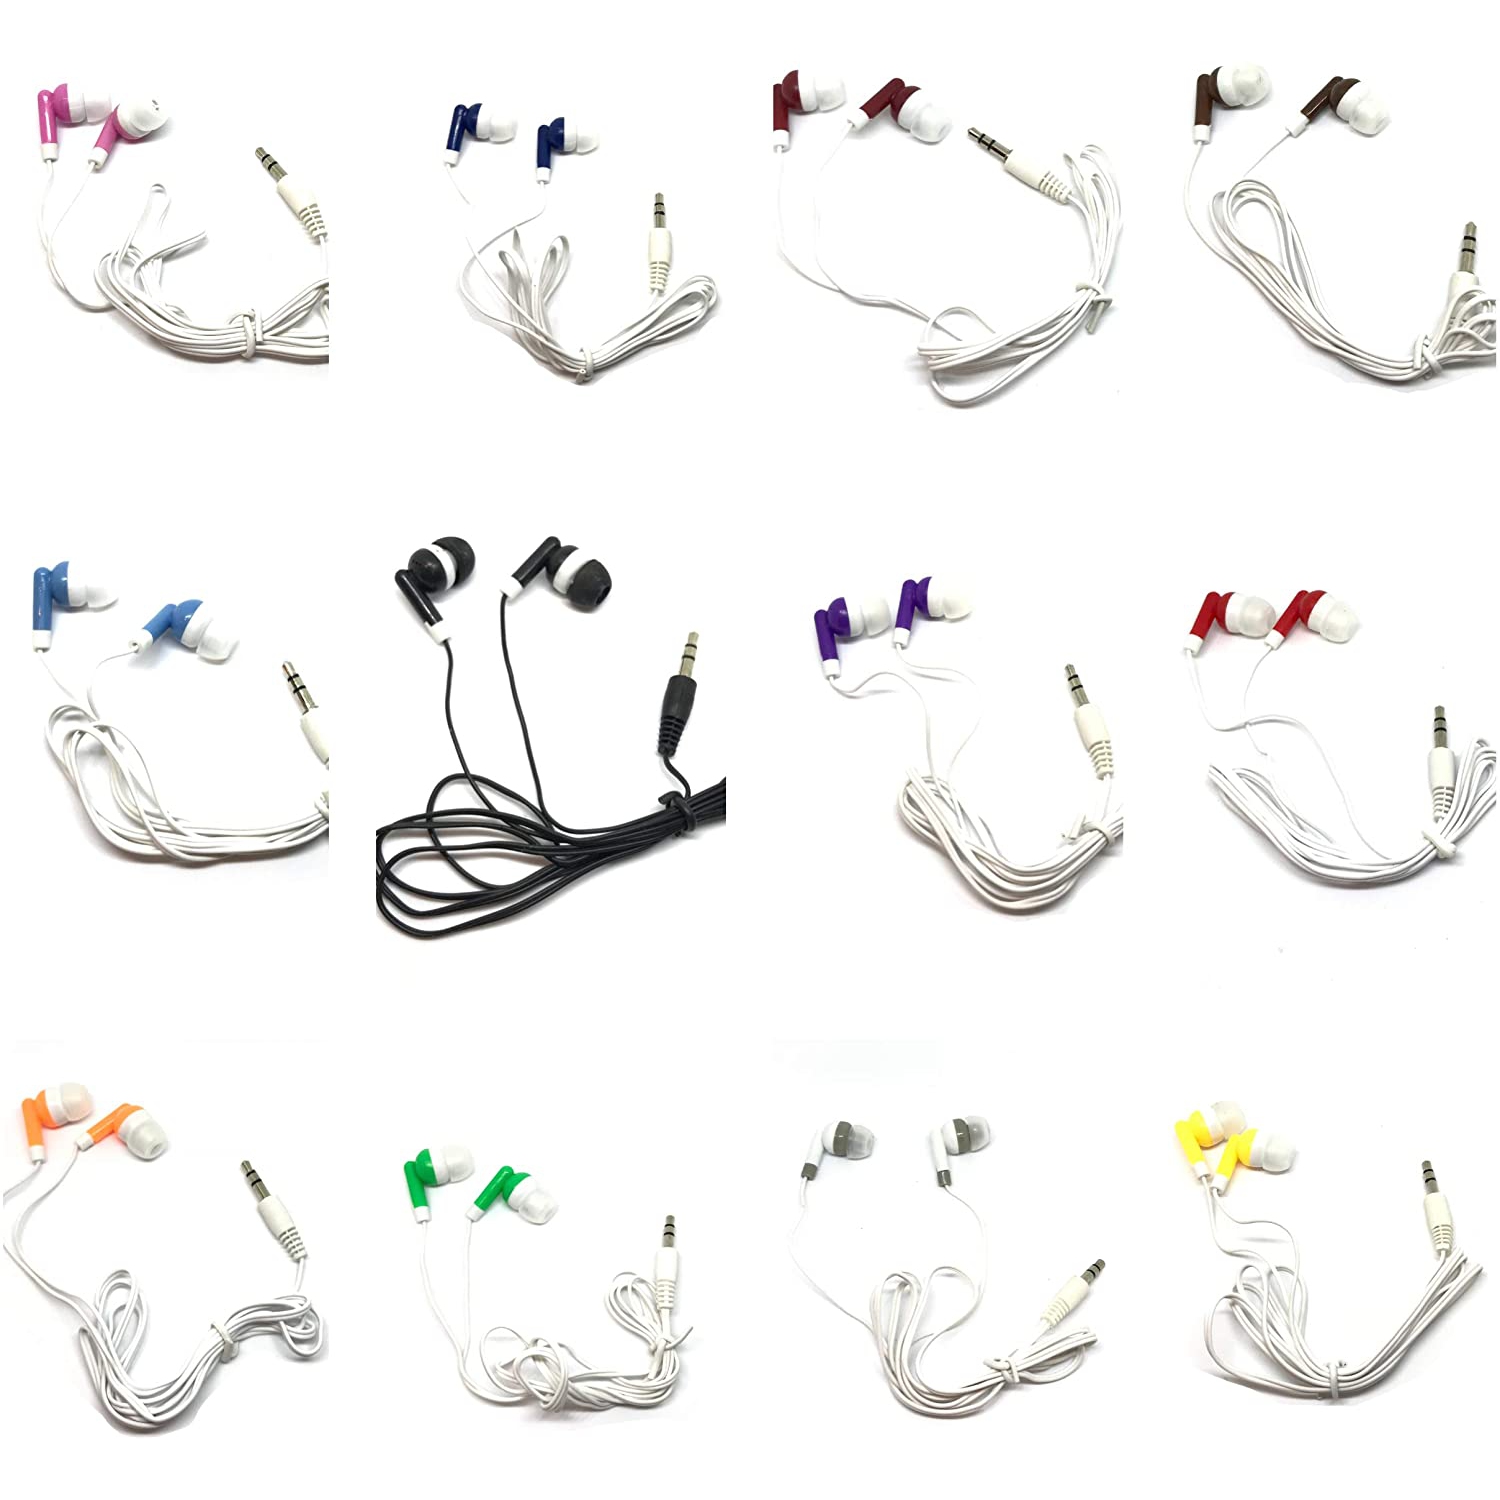 TFD Supplies Wholesale Bulk Earbuds Headphones 500 Pack for iPhone, Android, MP3 Player - Mixed Colors